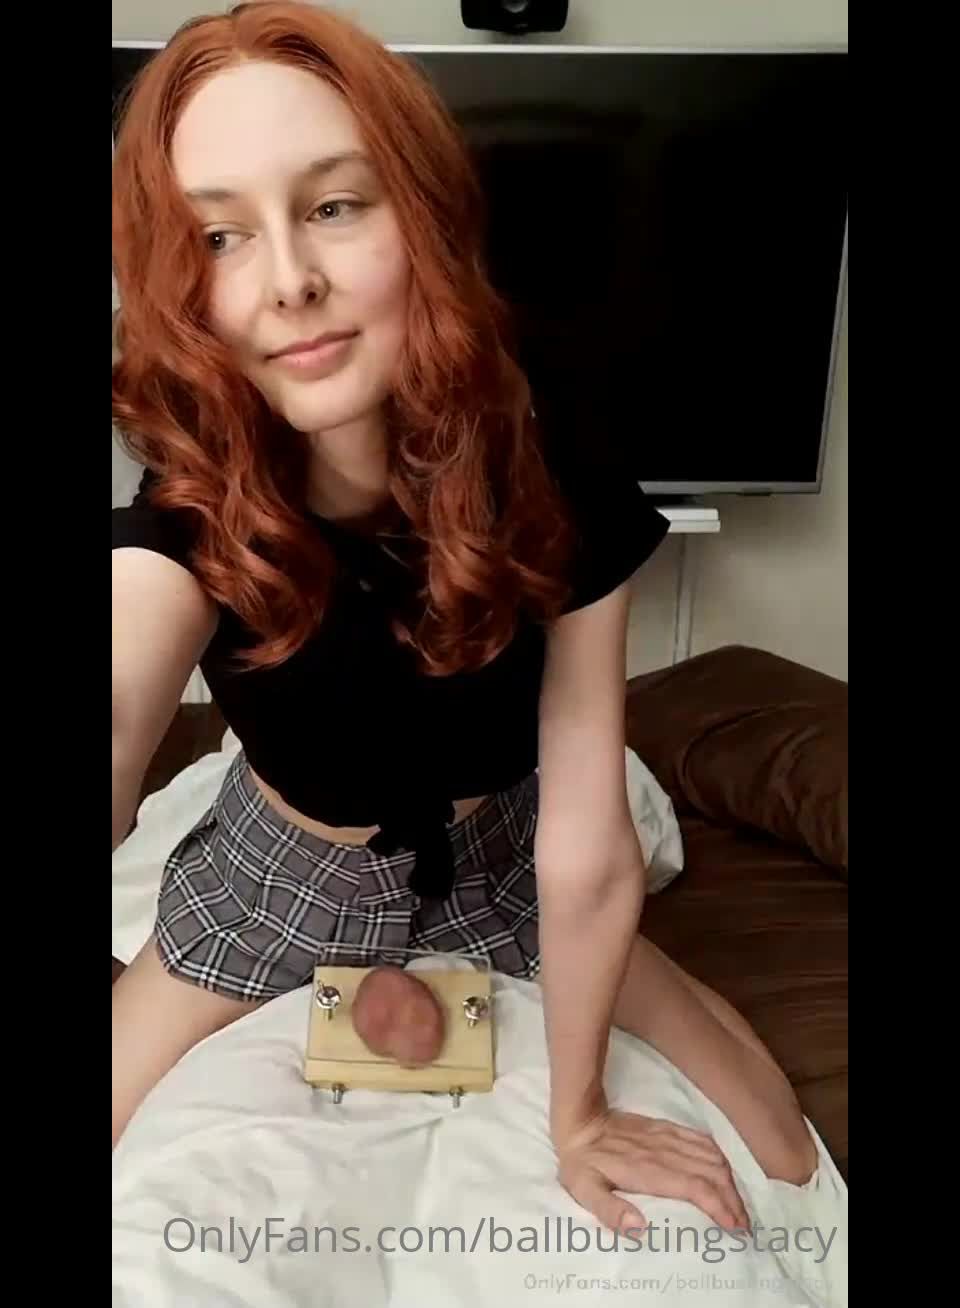 Redhead Stacy Beats Balls By Squishing Them Down In Her Very Handy Testicle Vise – BALLBUSTING STACY - Femdom